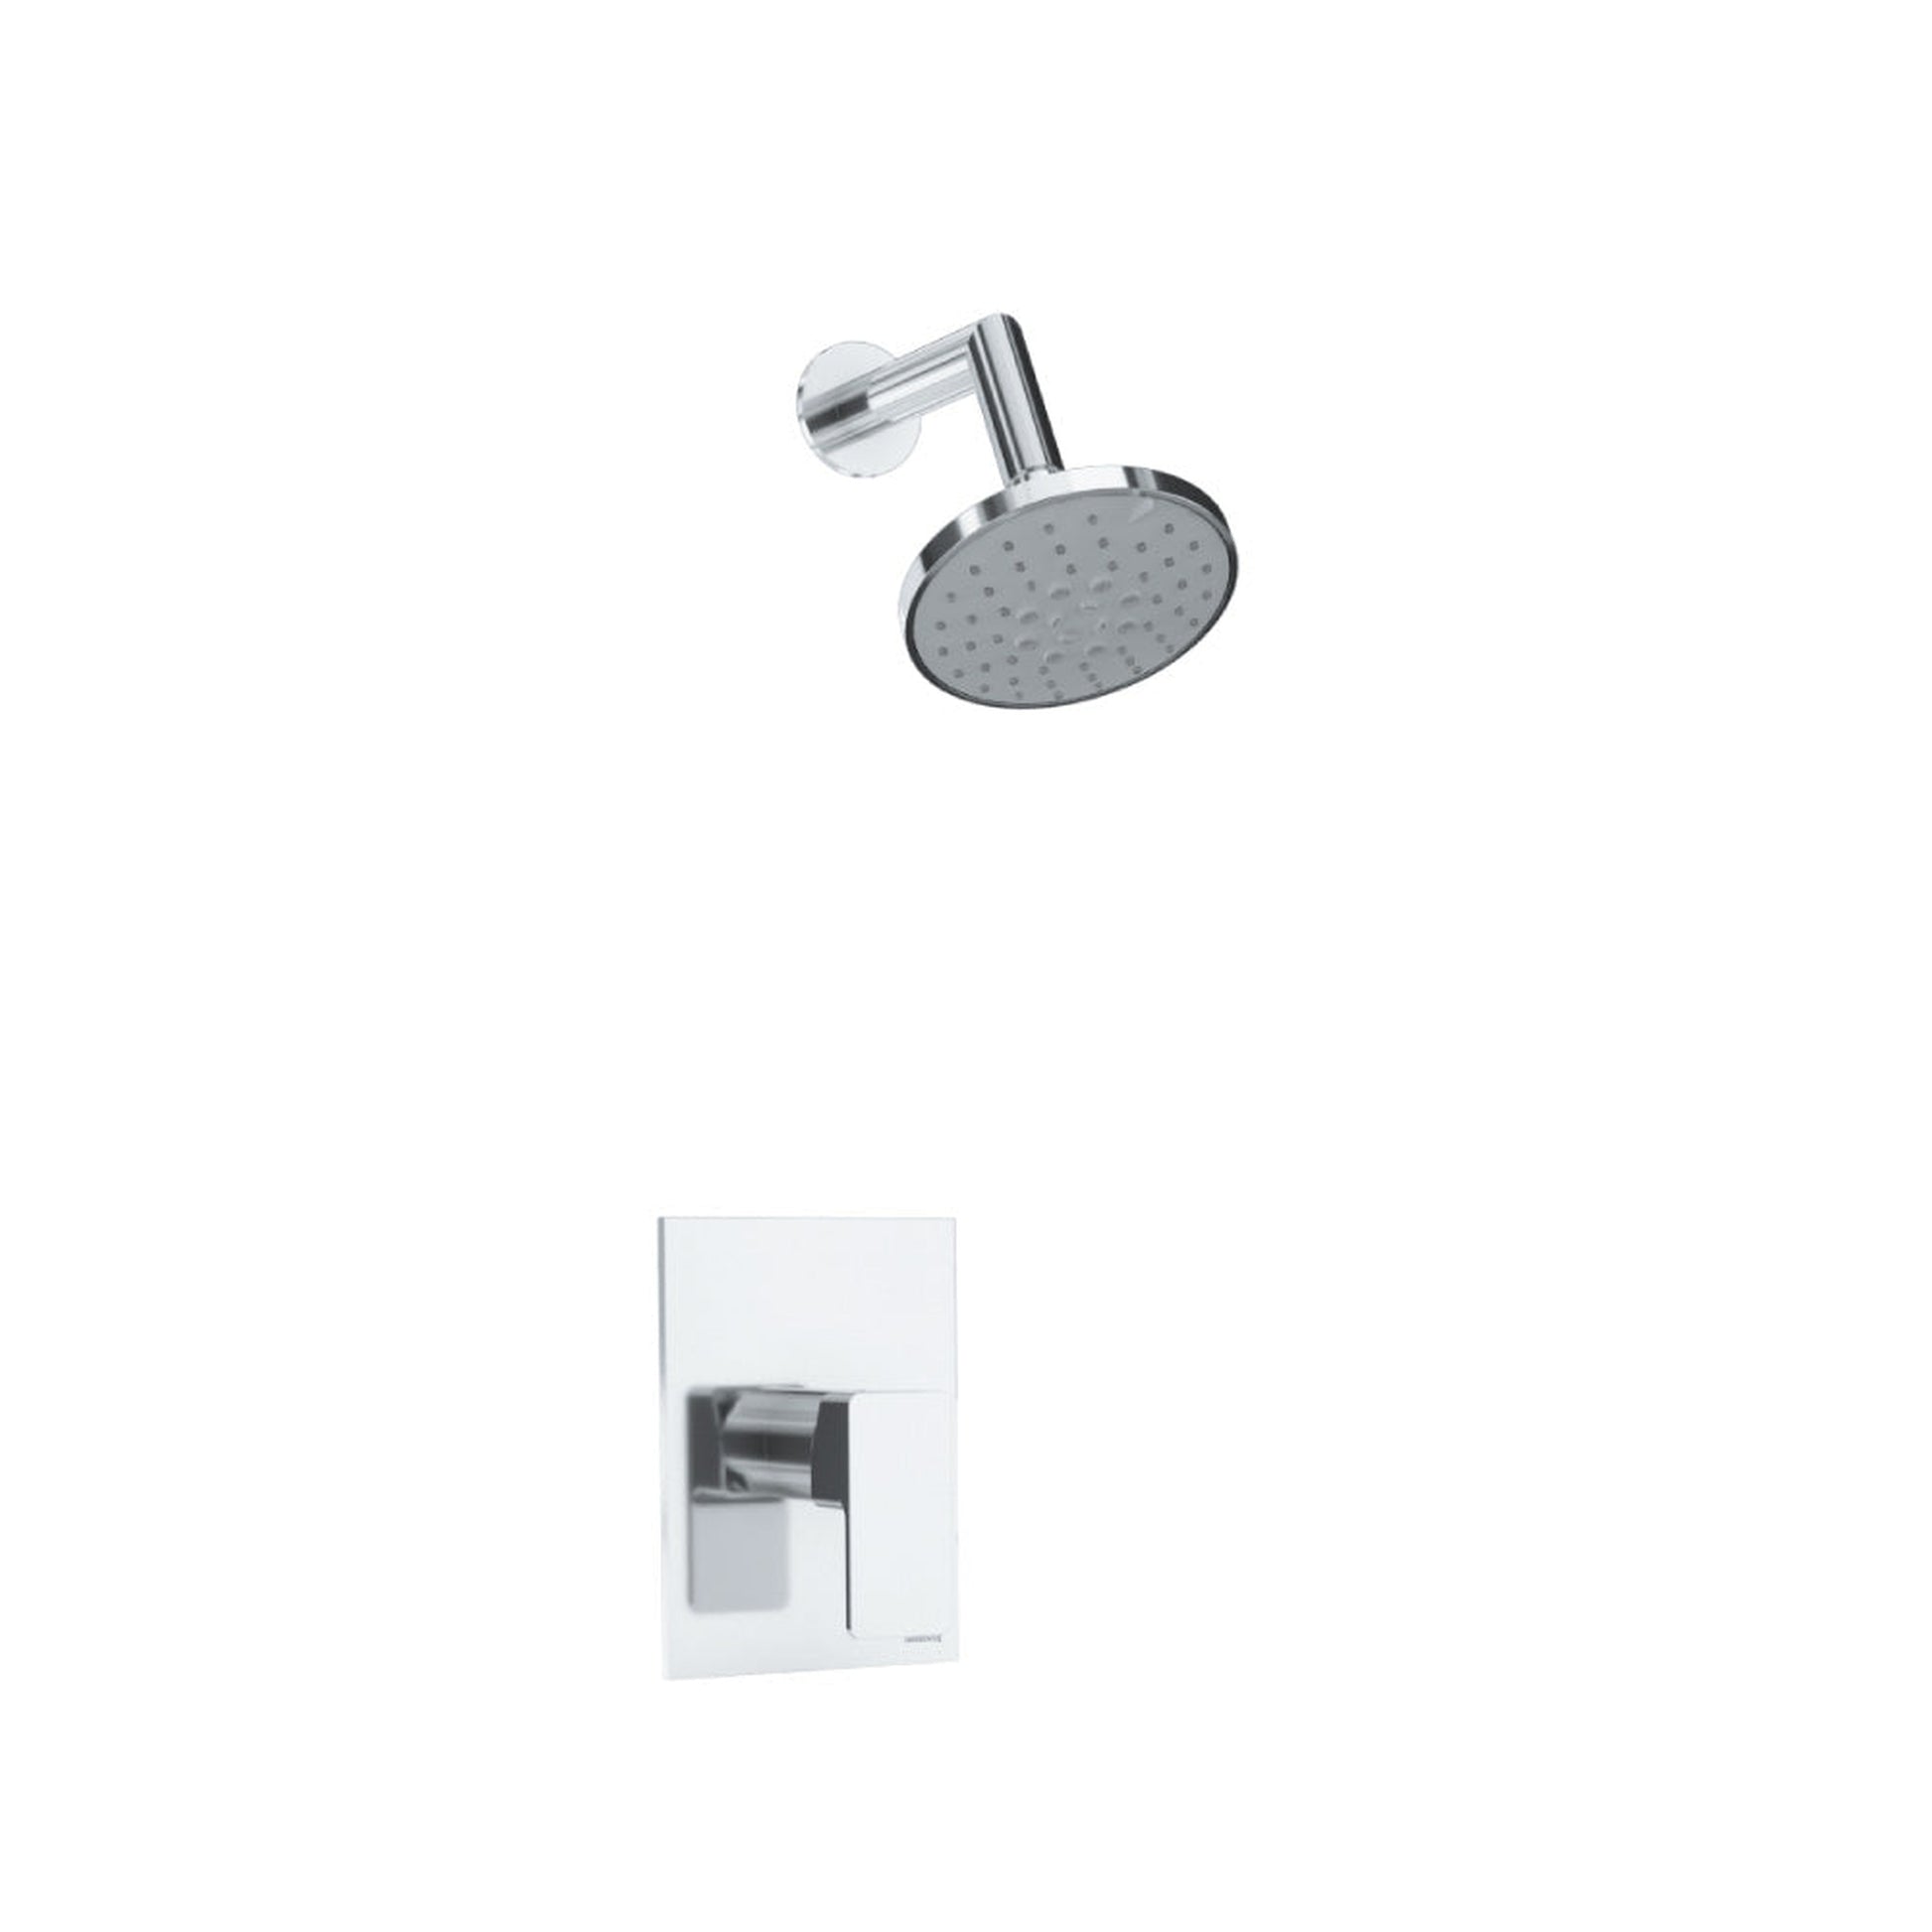 Isenberg Serie 196 Single Output Matte Black Wall-Mounted Shower Set With 3-Function ABS Shower Head, Single Handle Shower Trim and 1-Output Single Control Pressure Balance Valve